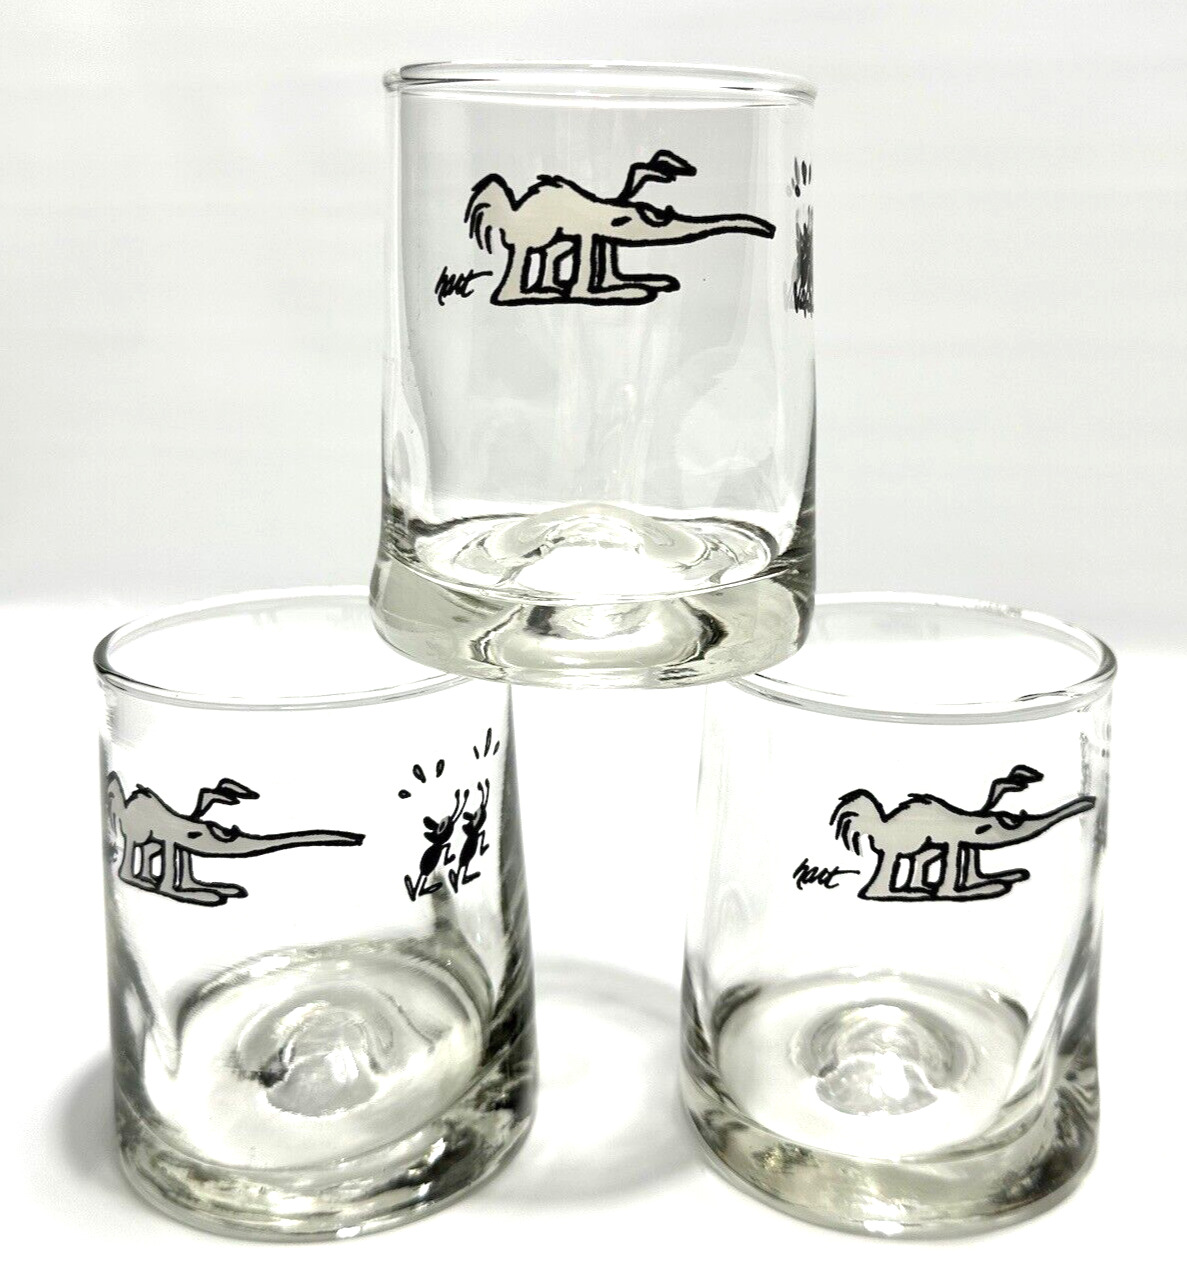 Vintage BC Comics Anteater Ice Age Whiskey Drinking Glass Tumblers Set Of 3